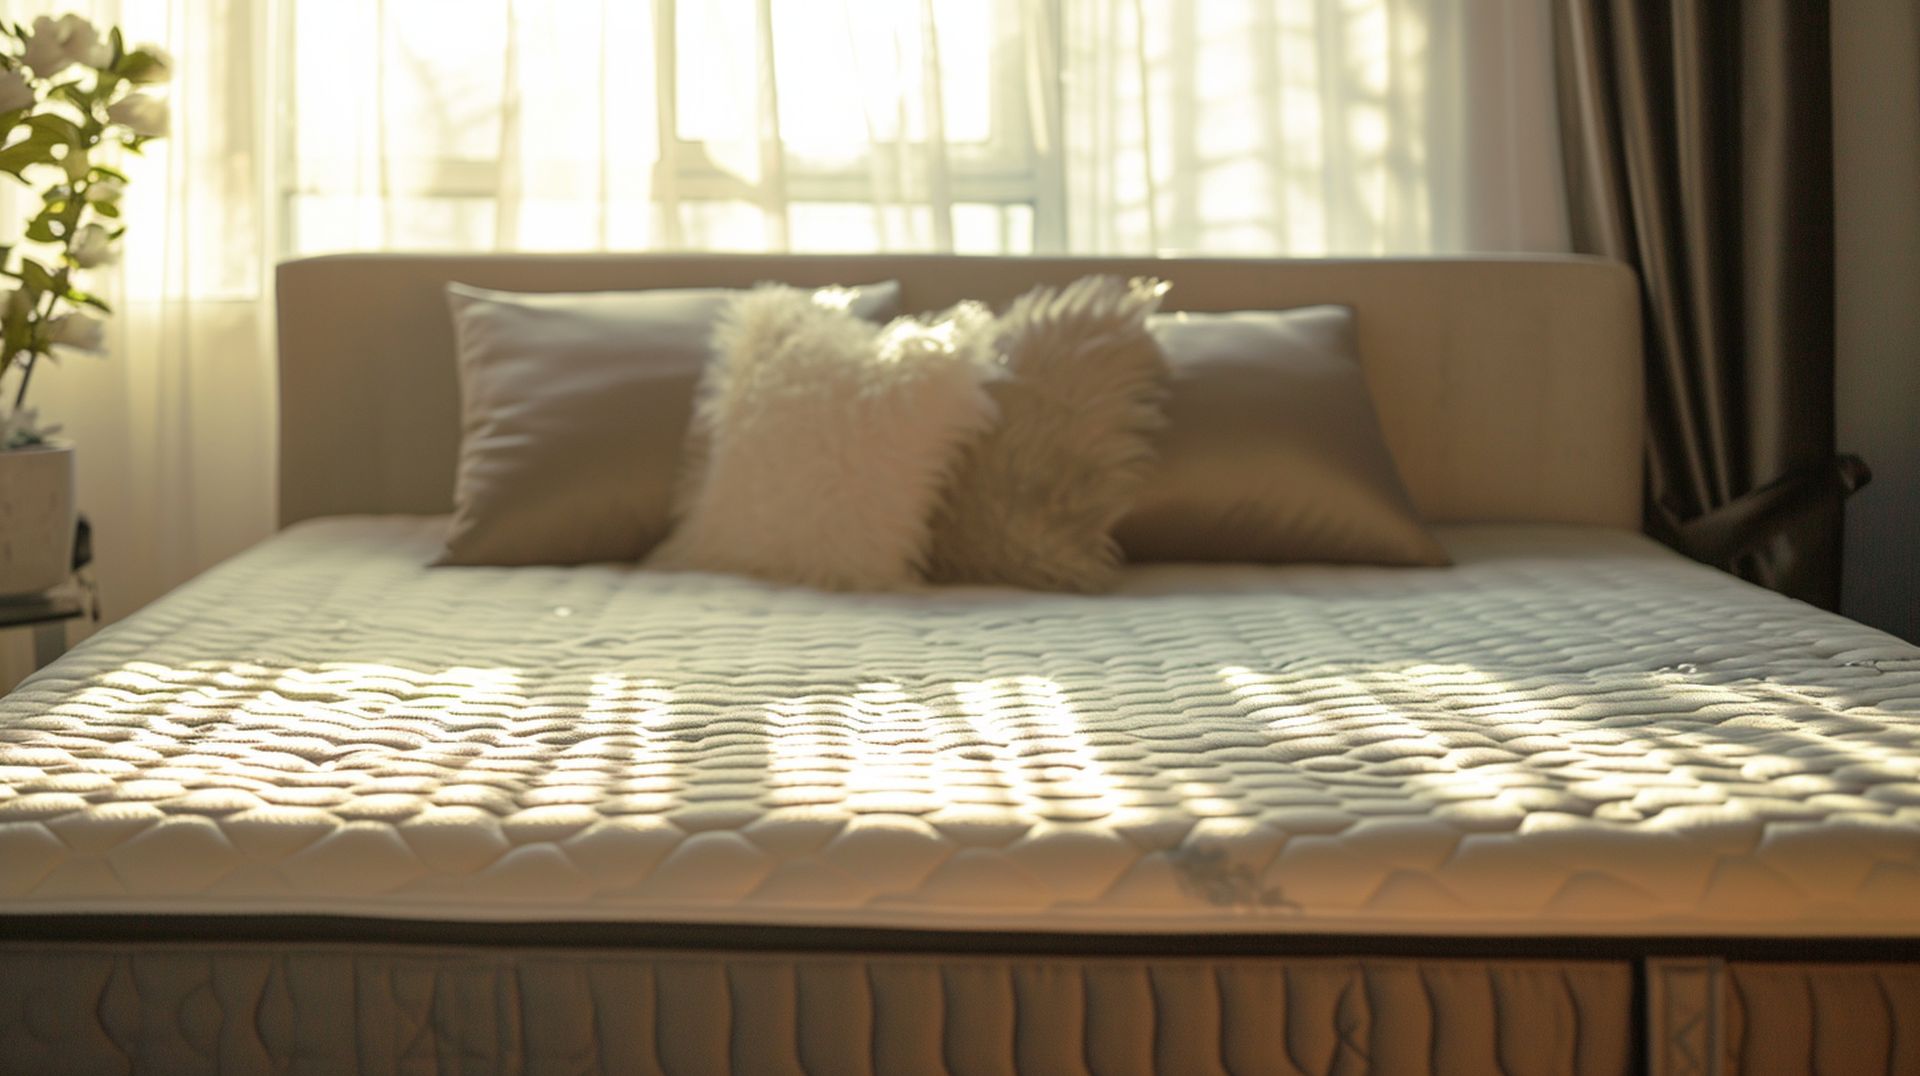 Types of mattresses at mattress dealers in Nashua, NH